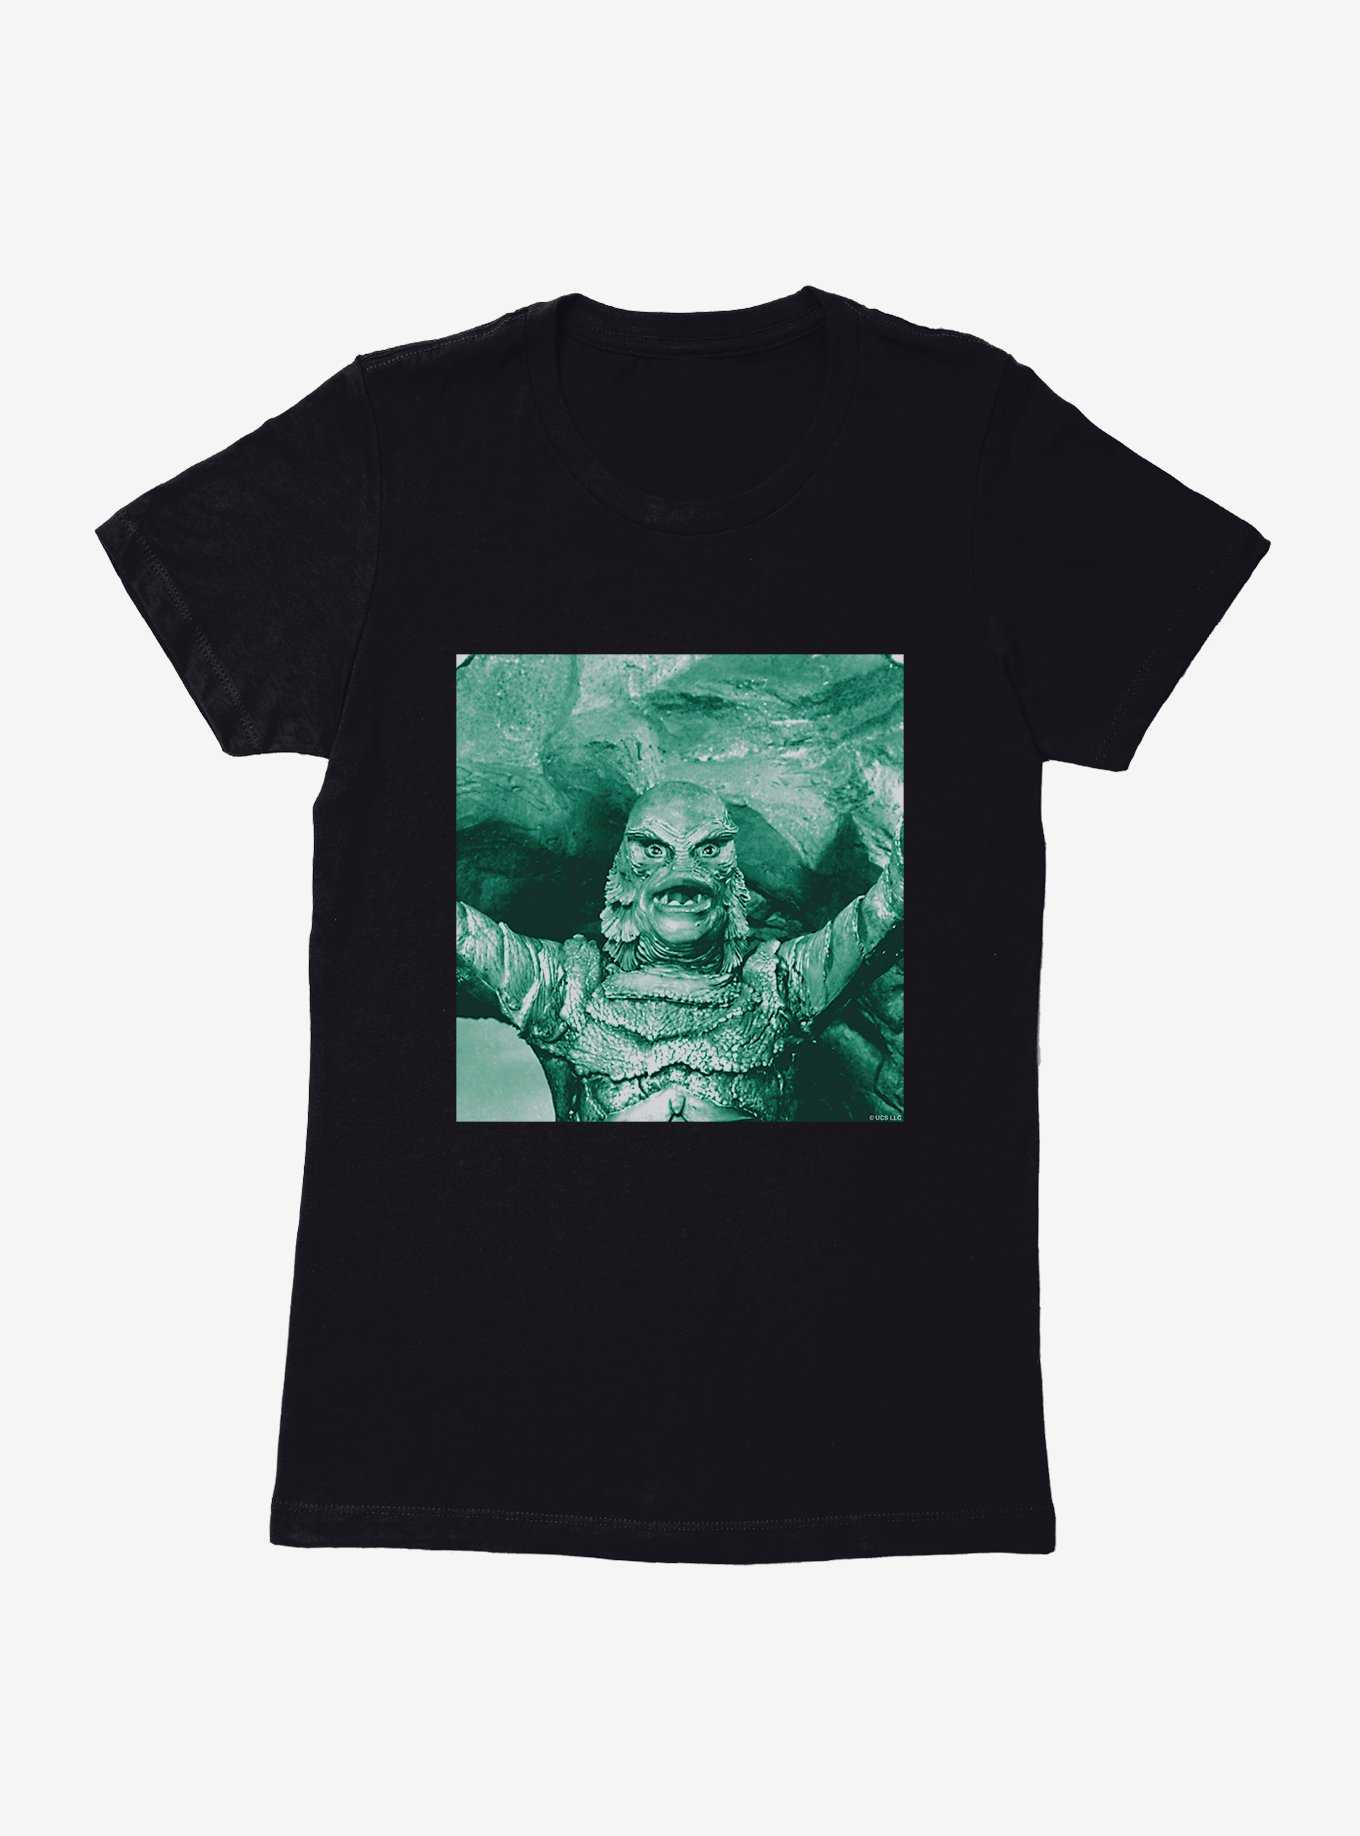 Creature From The Black Lagoon Live Action Green Scene Womens T-Shirt, , hi-res